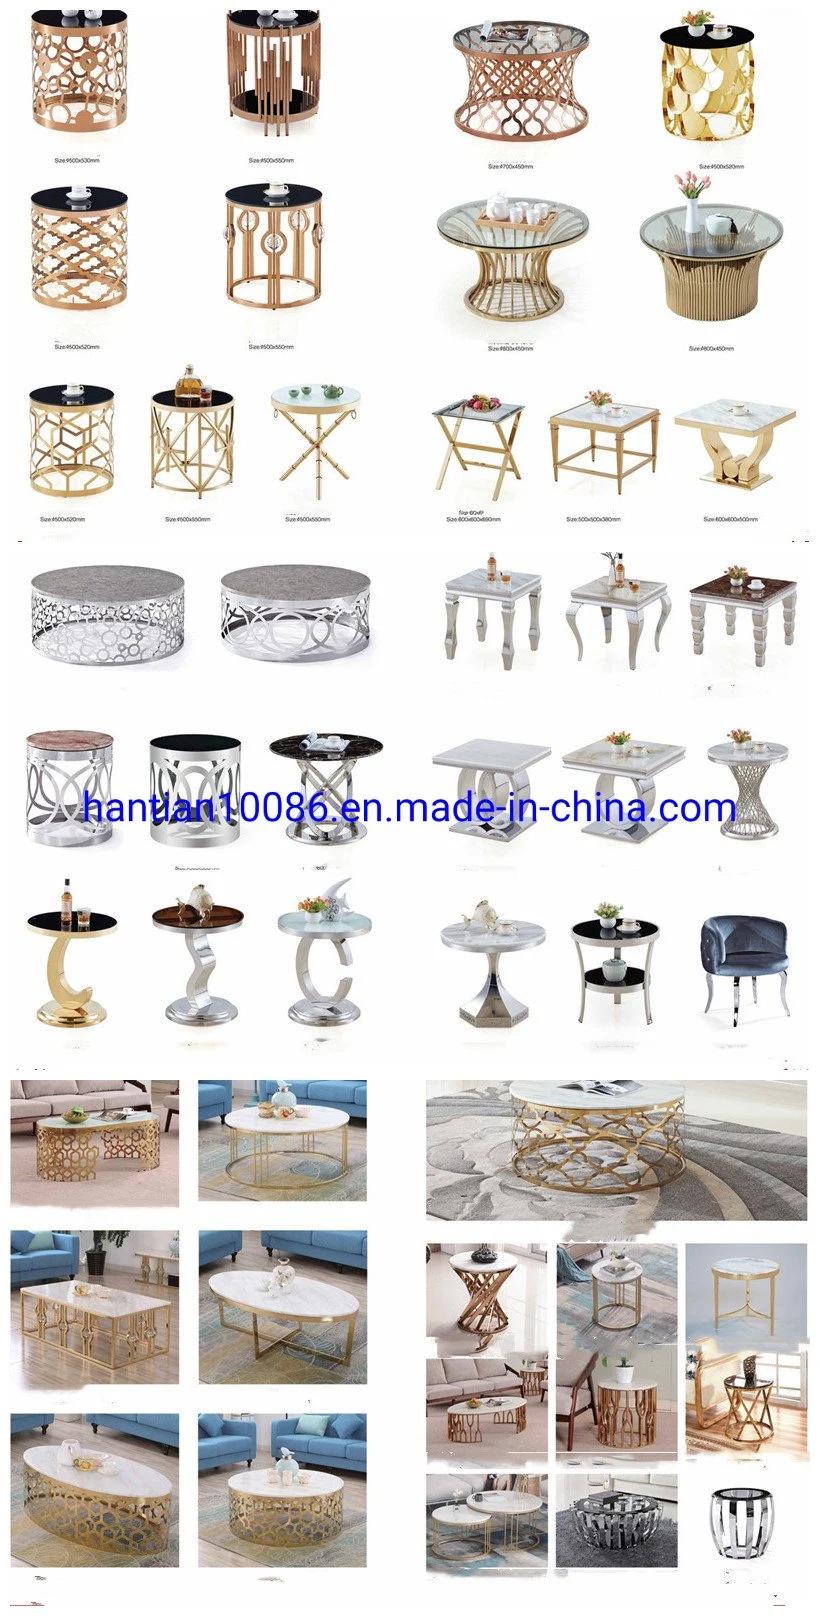 Gold Wedding Side Table New Funny Amusement Park Items Cake Sand Table